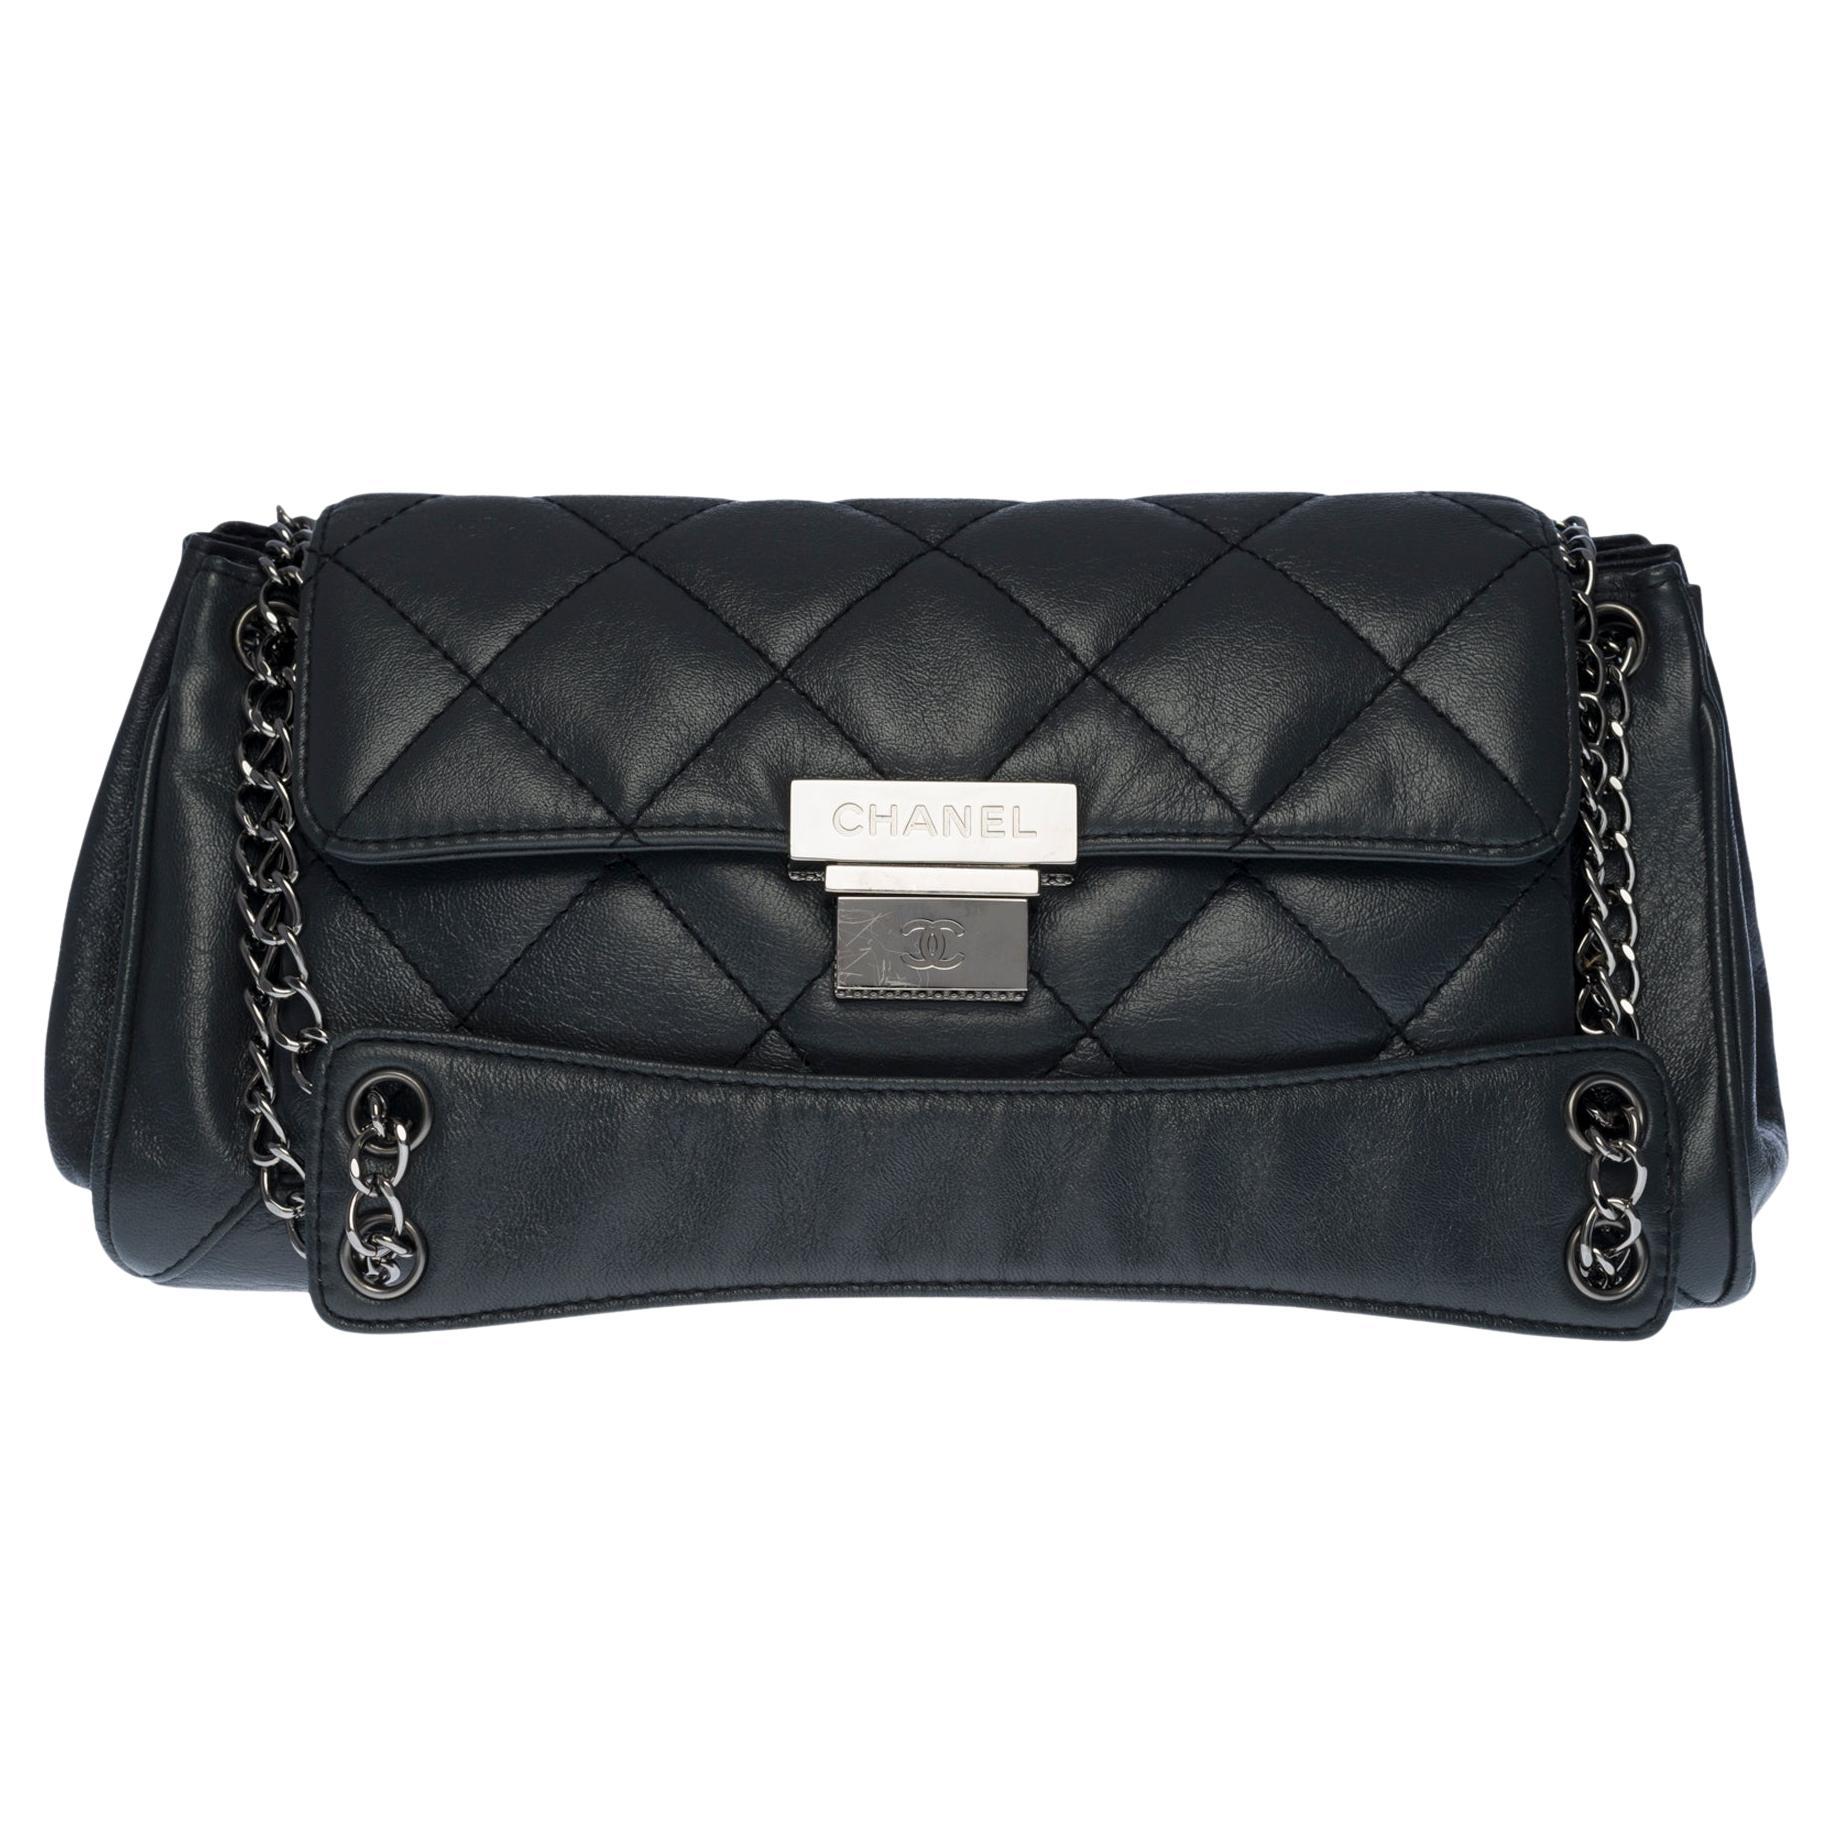 Chanel Classic Flap shoulder bag in grey quilted leather, SHW